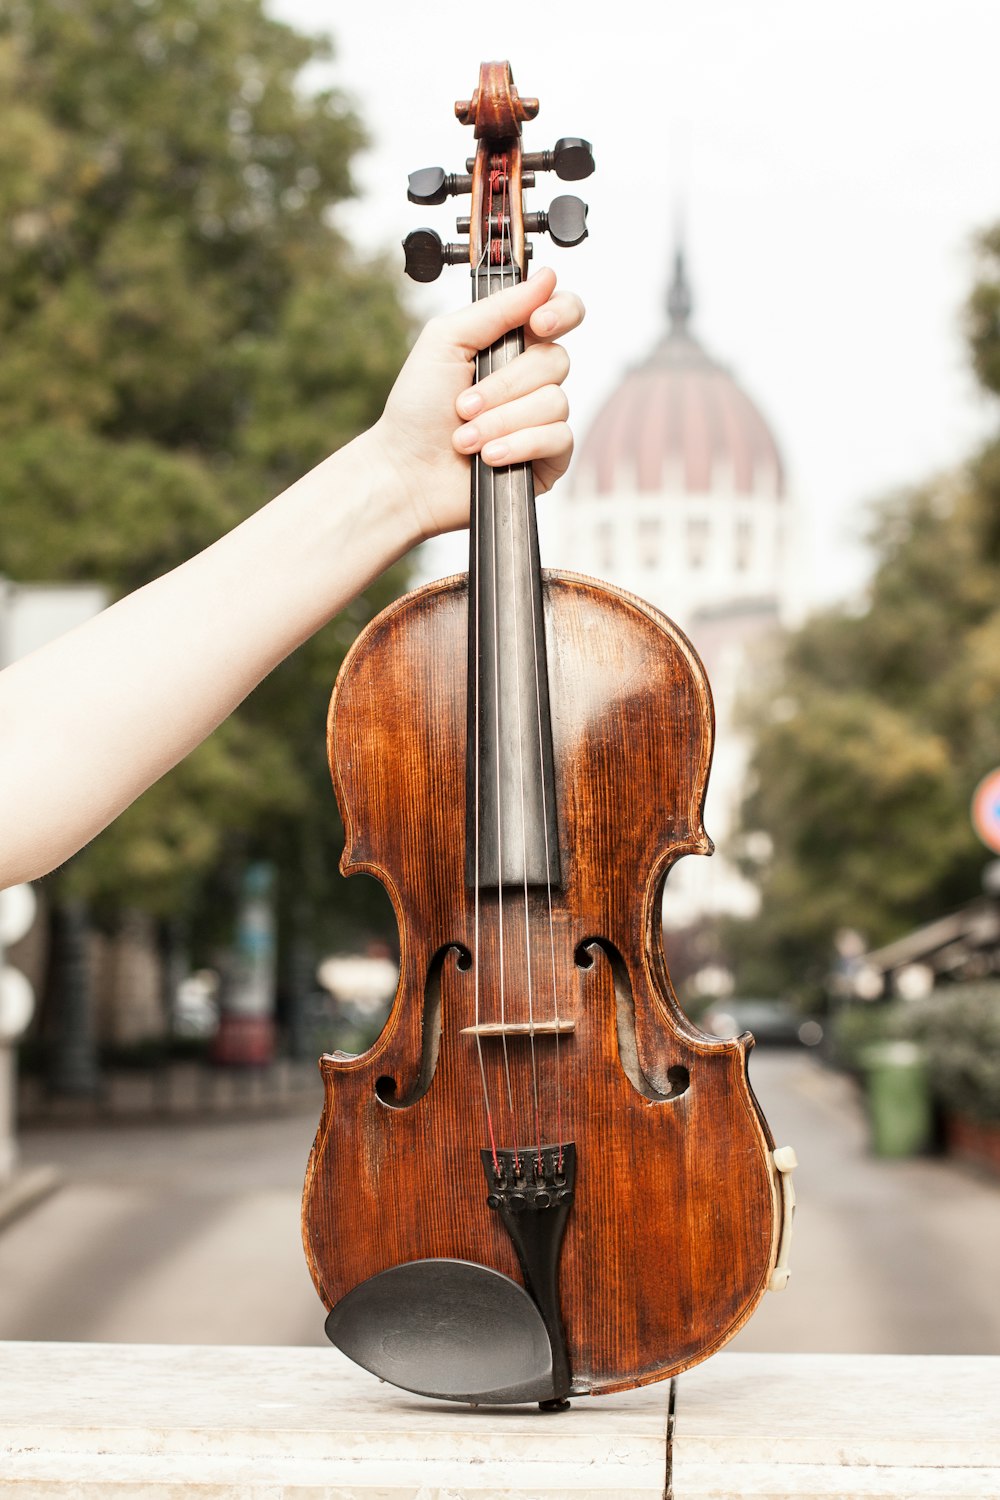 person playing violin during daytime